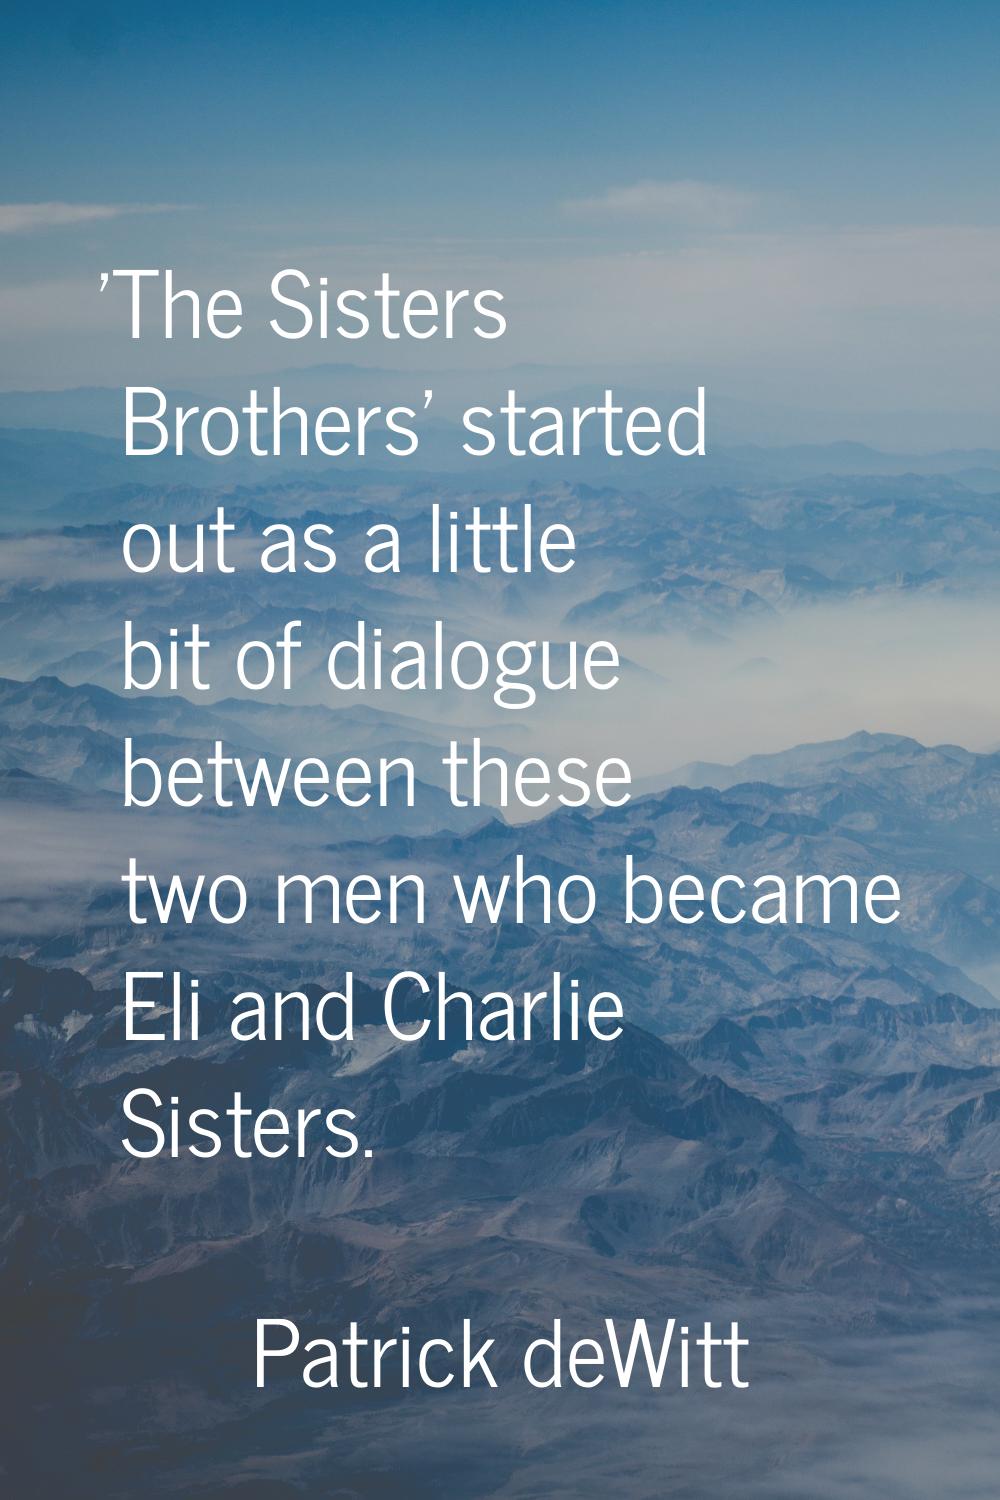 'The Sisters Brothers' started out as a little bit of dialogue between these two men who became Eli